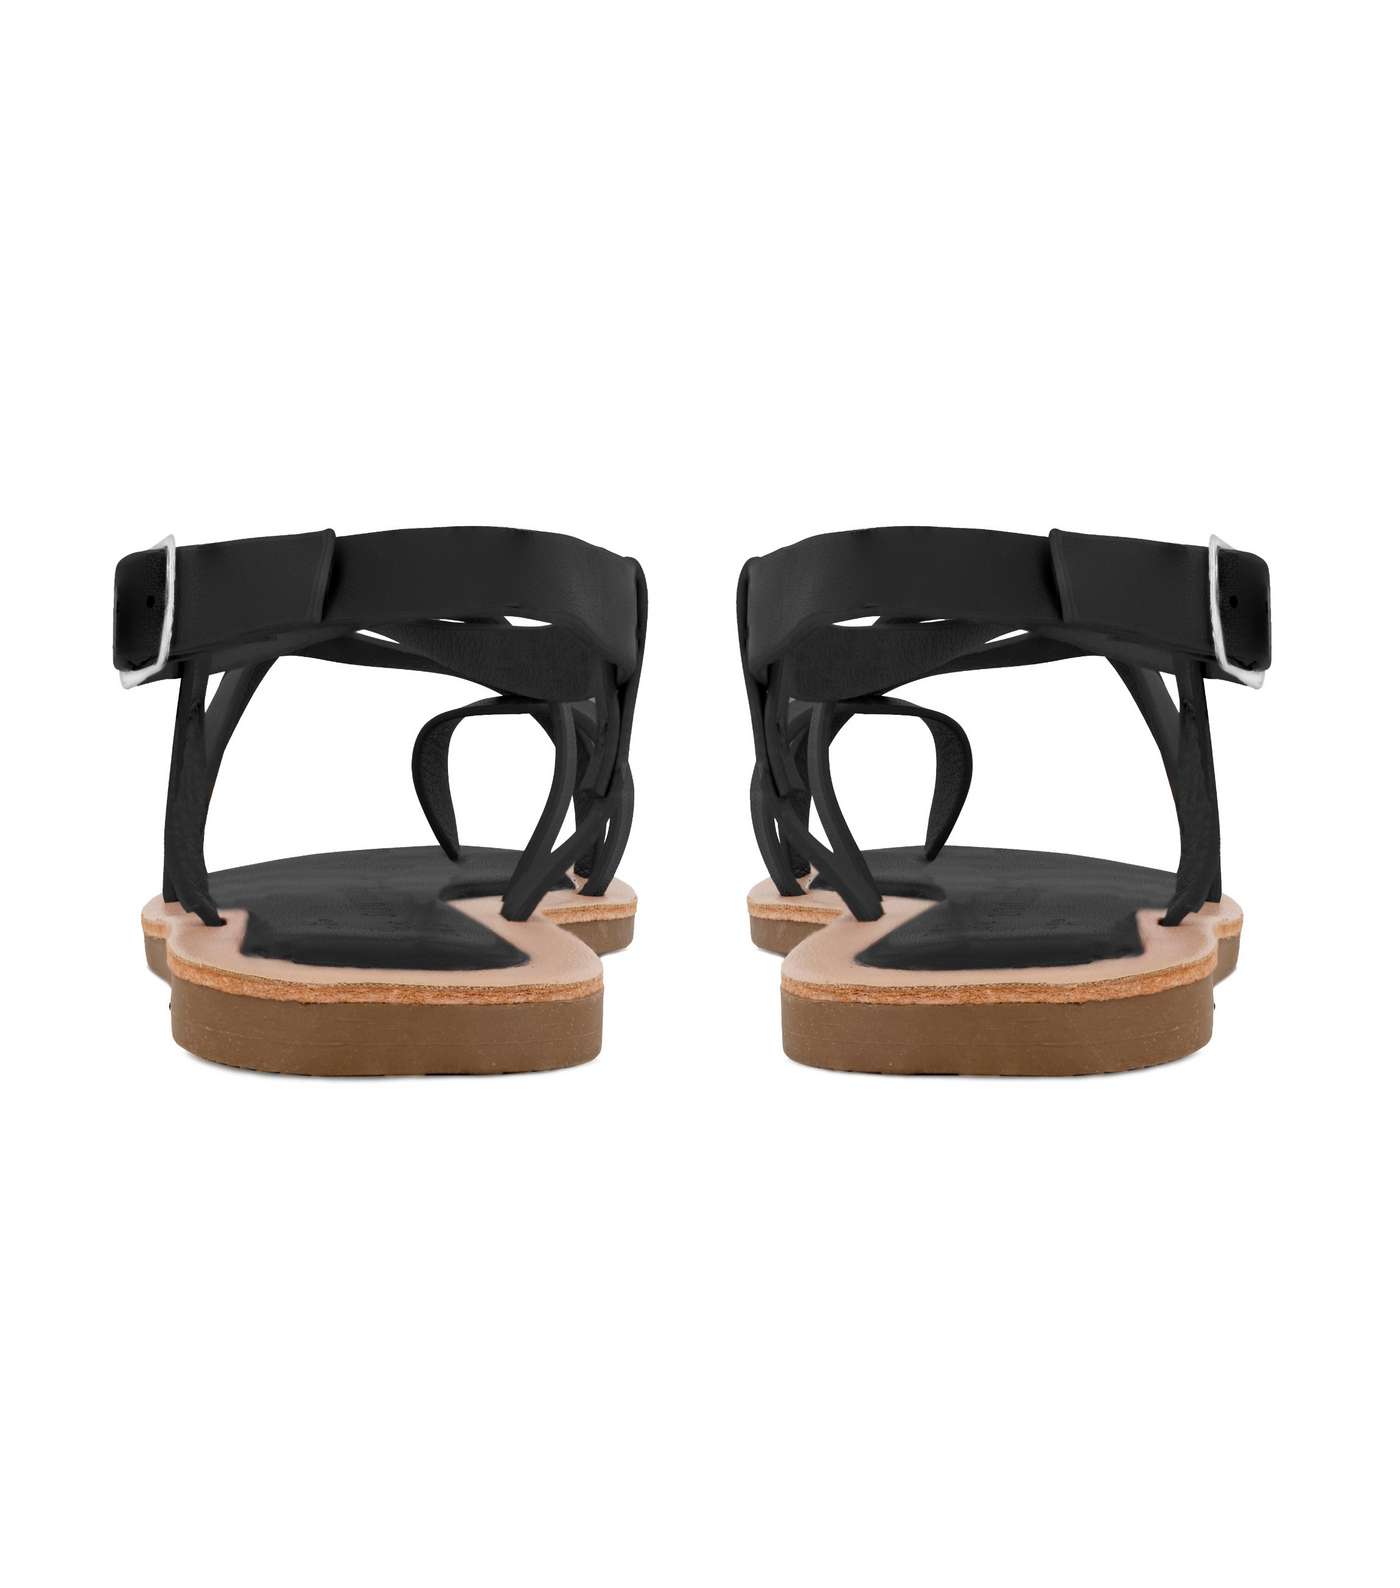 South Beach Black Strappy Gladiator Sandals Image 4